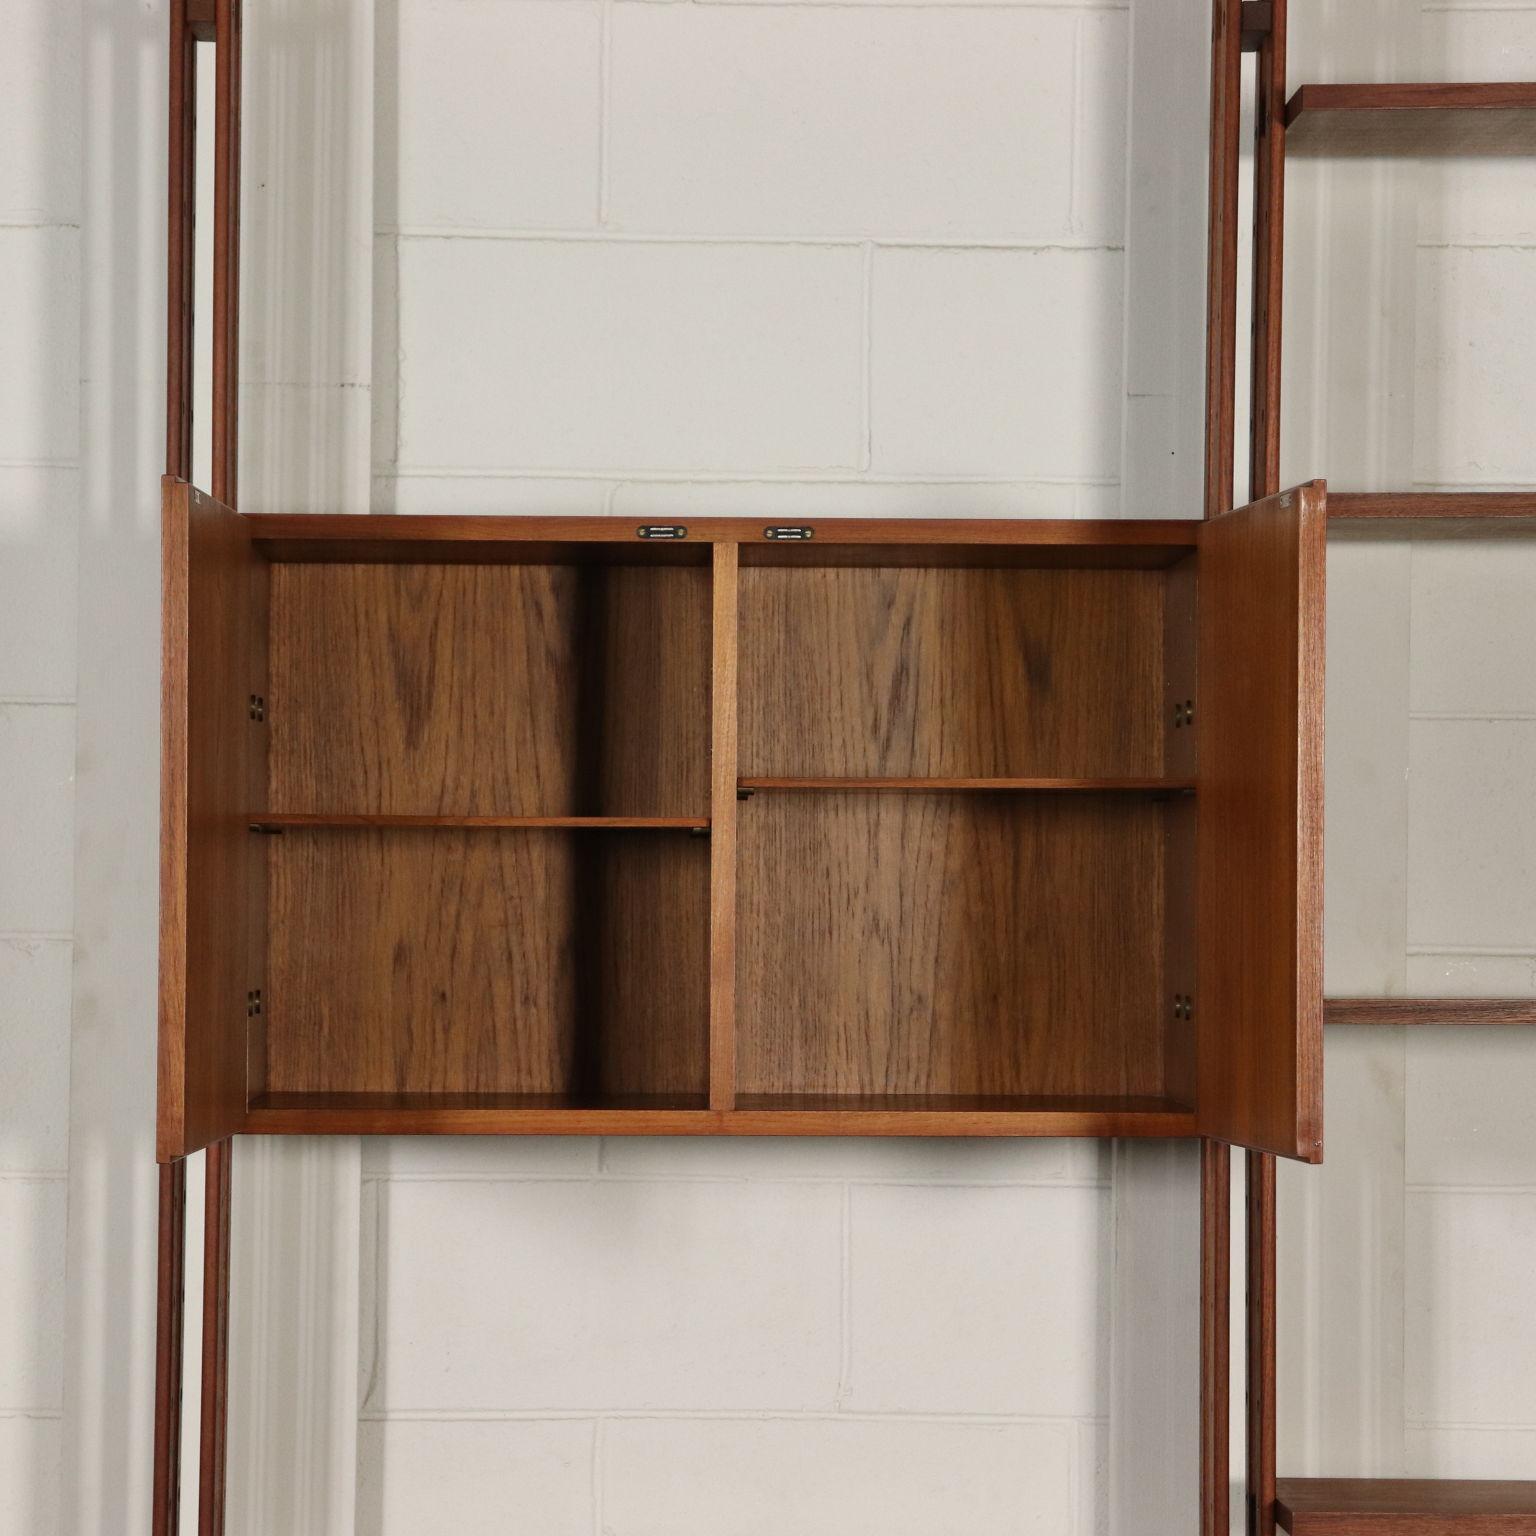 Mid-Century Modern Floor-to-Ceiling Bookcase by Franco Albini Vintage Design, Italy, 1960s